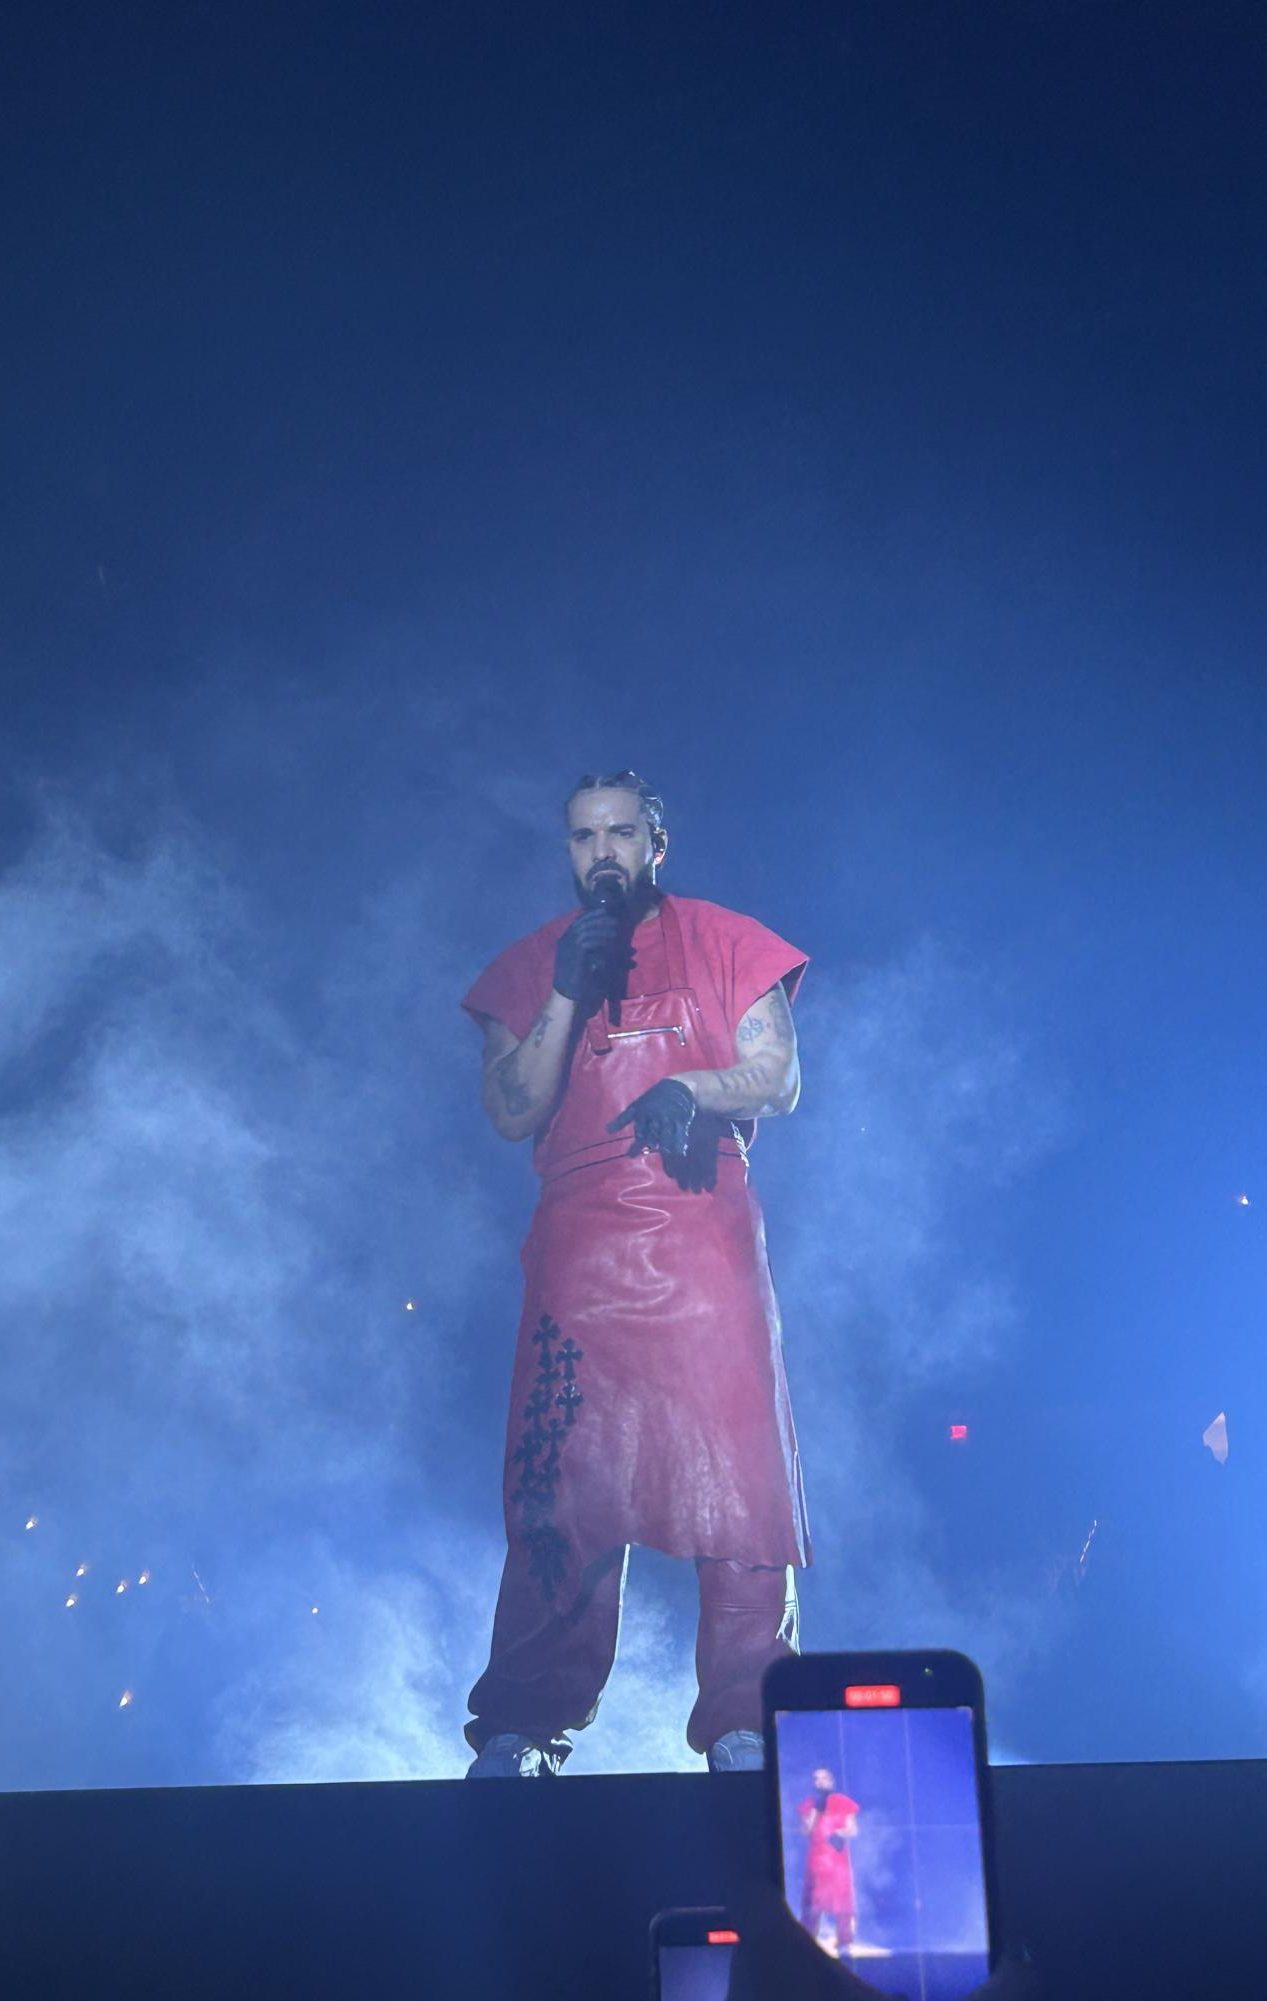 I really enjoyed how engaged Drake and 21 Savage were with their audiences and how full of energy the artists made the concert. Even though I was able to have been on the floor, the artists went out of their way to make sure everyone left the concert feeling happy about their experiences.